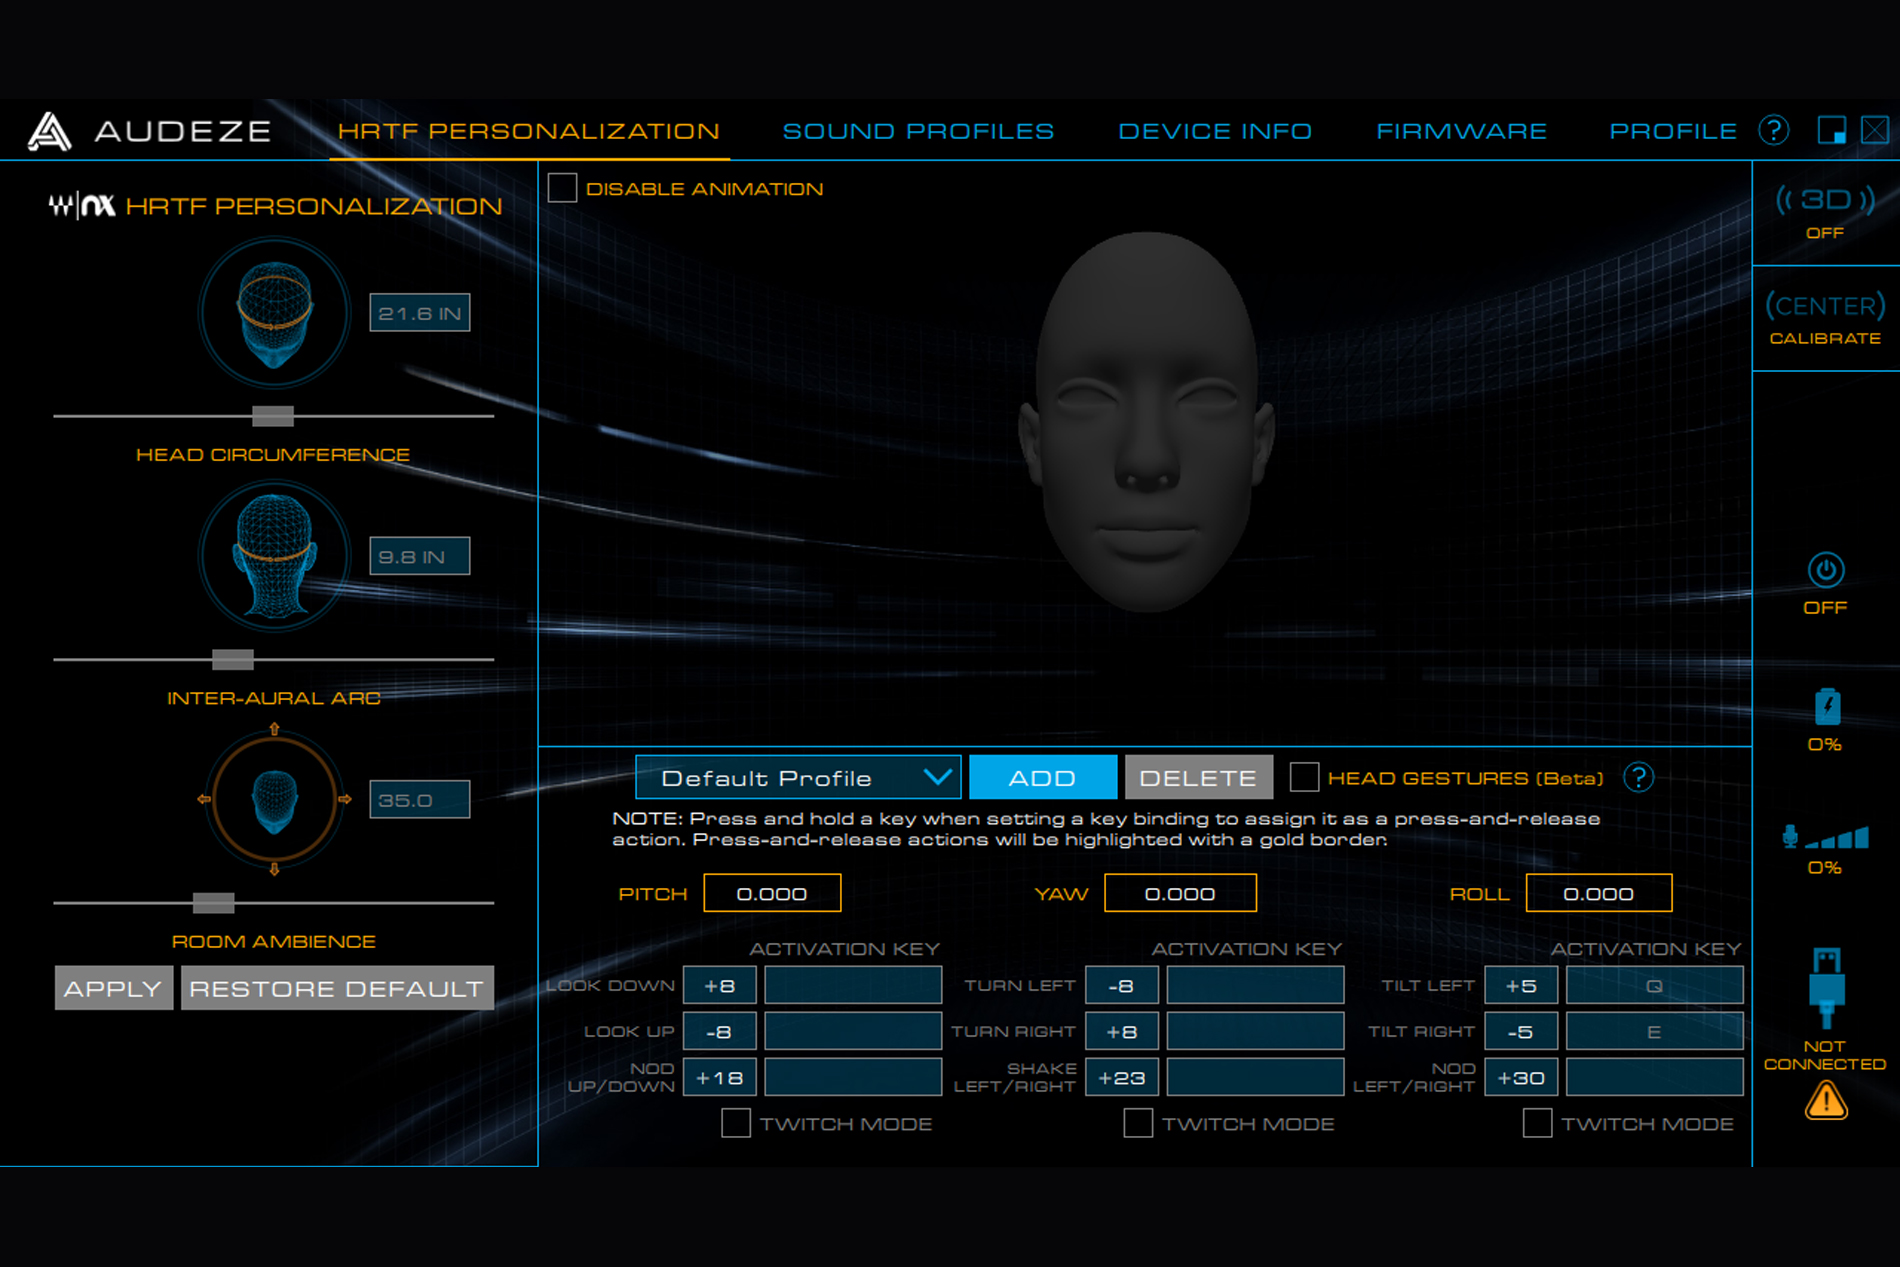 A screenshot of Audeze HQ, which shows the settings page for the Audeze Mobius gaming headset